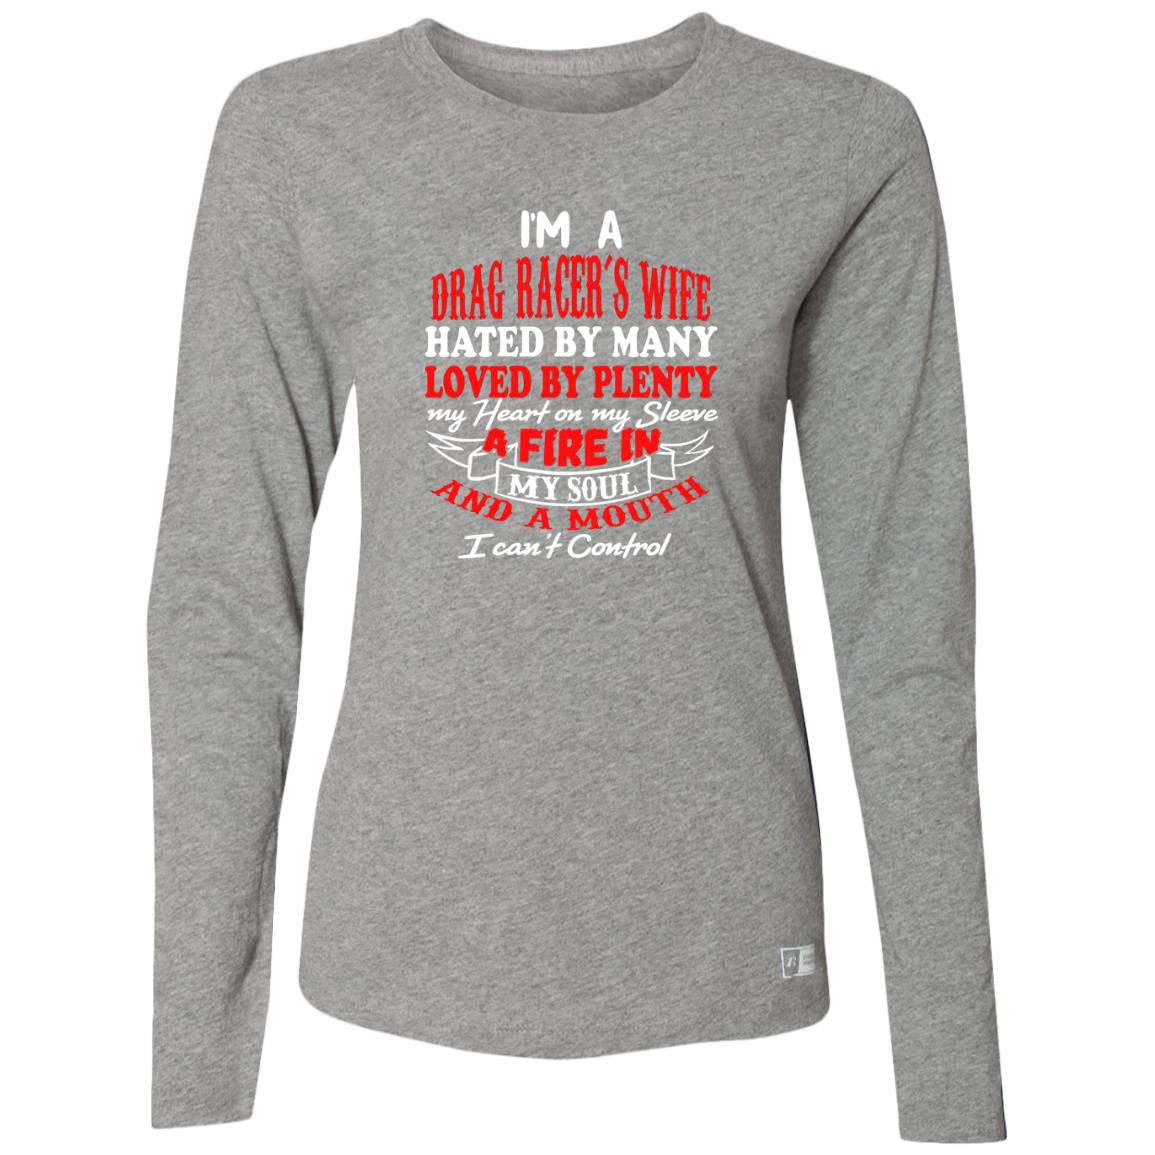 I'm A Drag Racer's Wife Hated By Many Loved By Plenty Ladies’ Essential Dri-Power Long Sleeve Tee